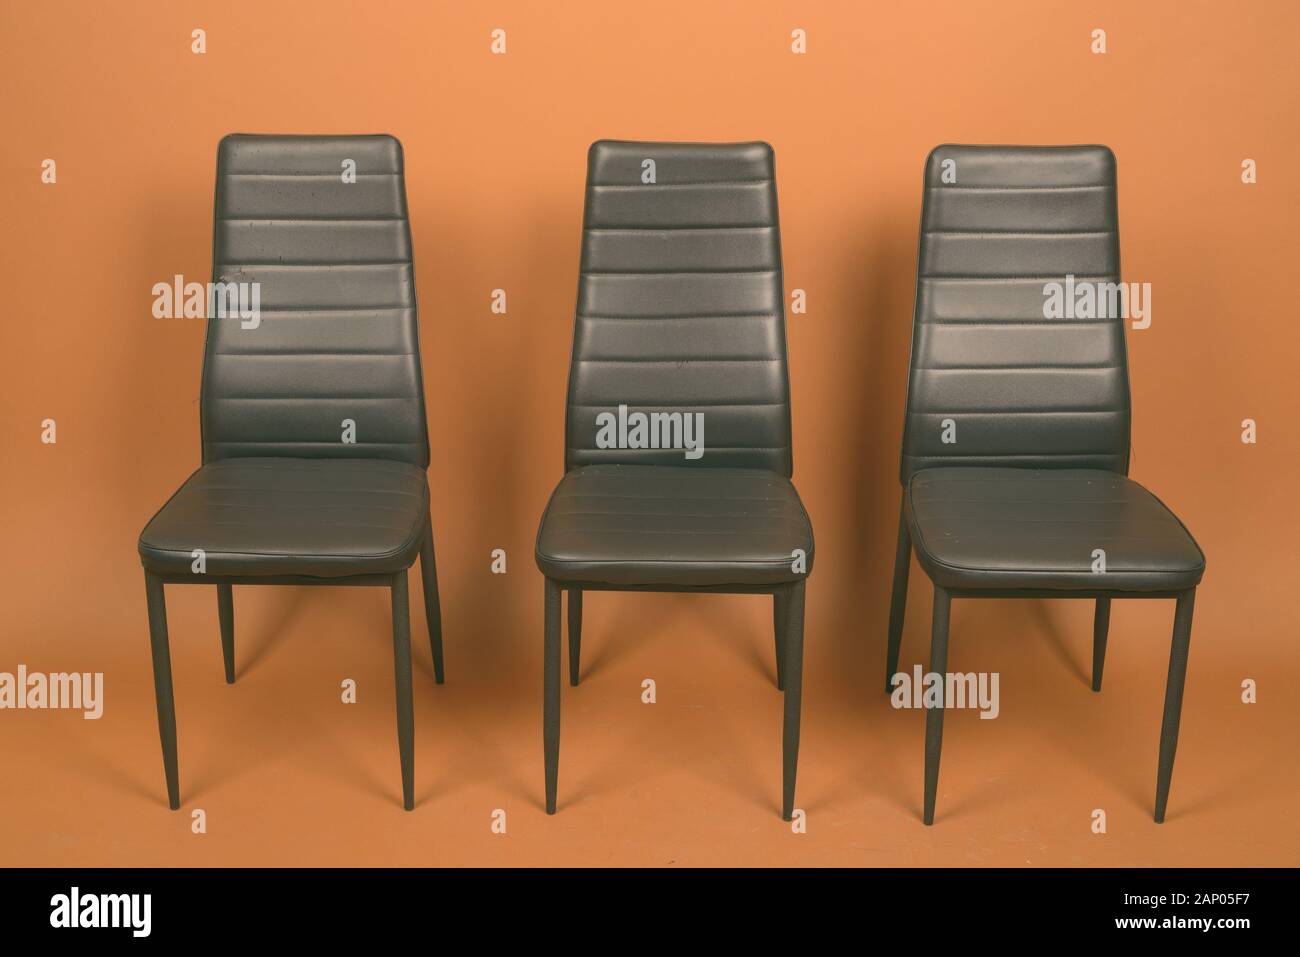 Three Leather Chairs Aligned Against Brown Background Stock Photo